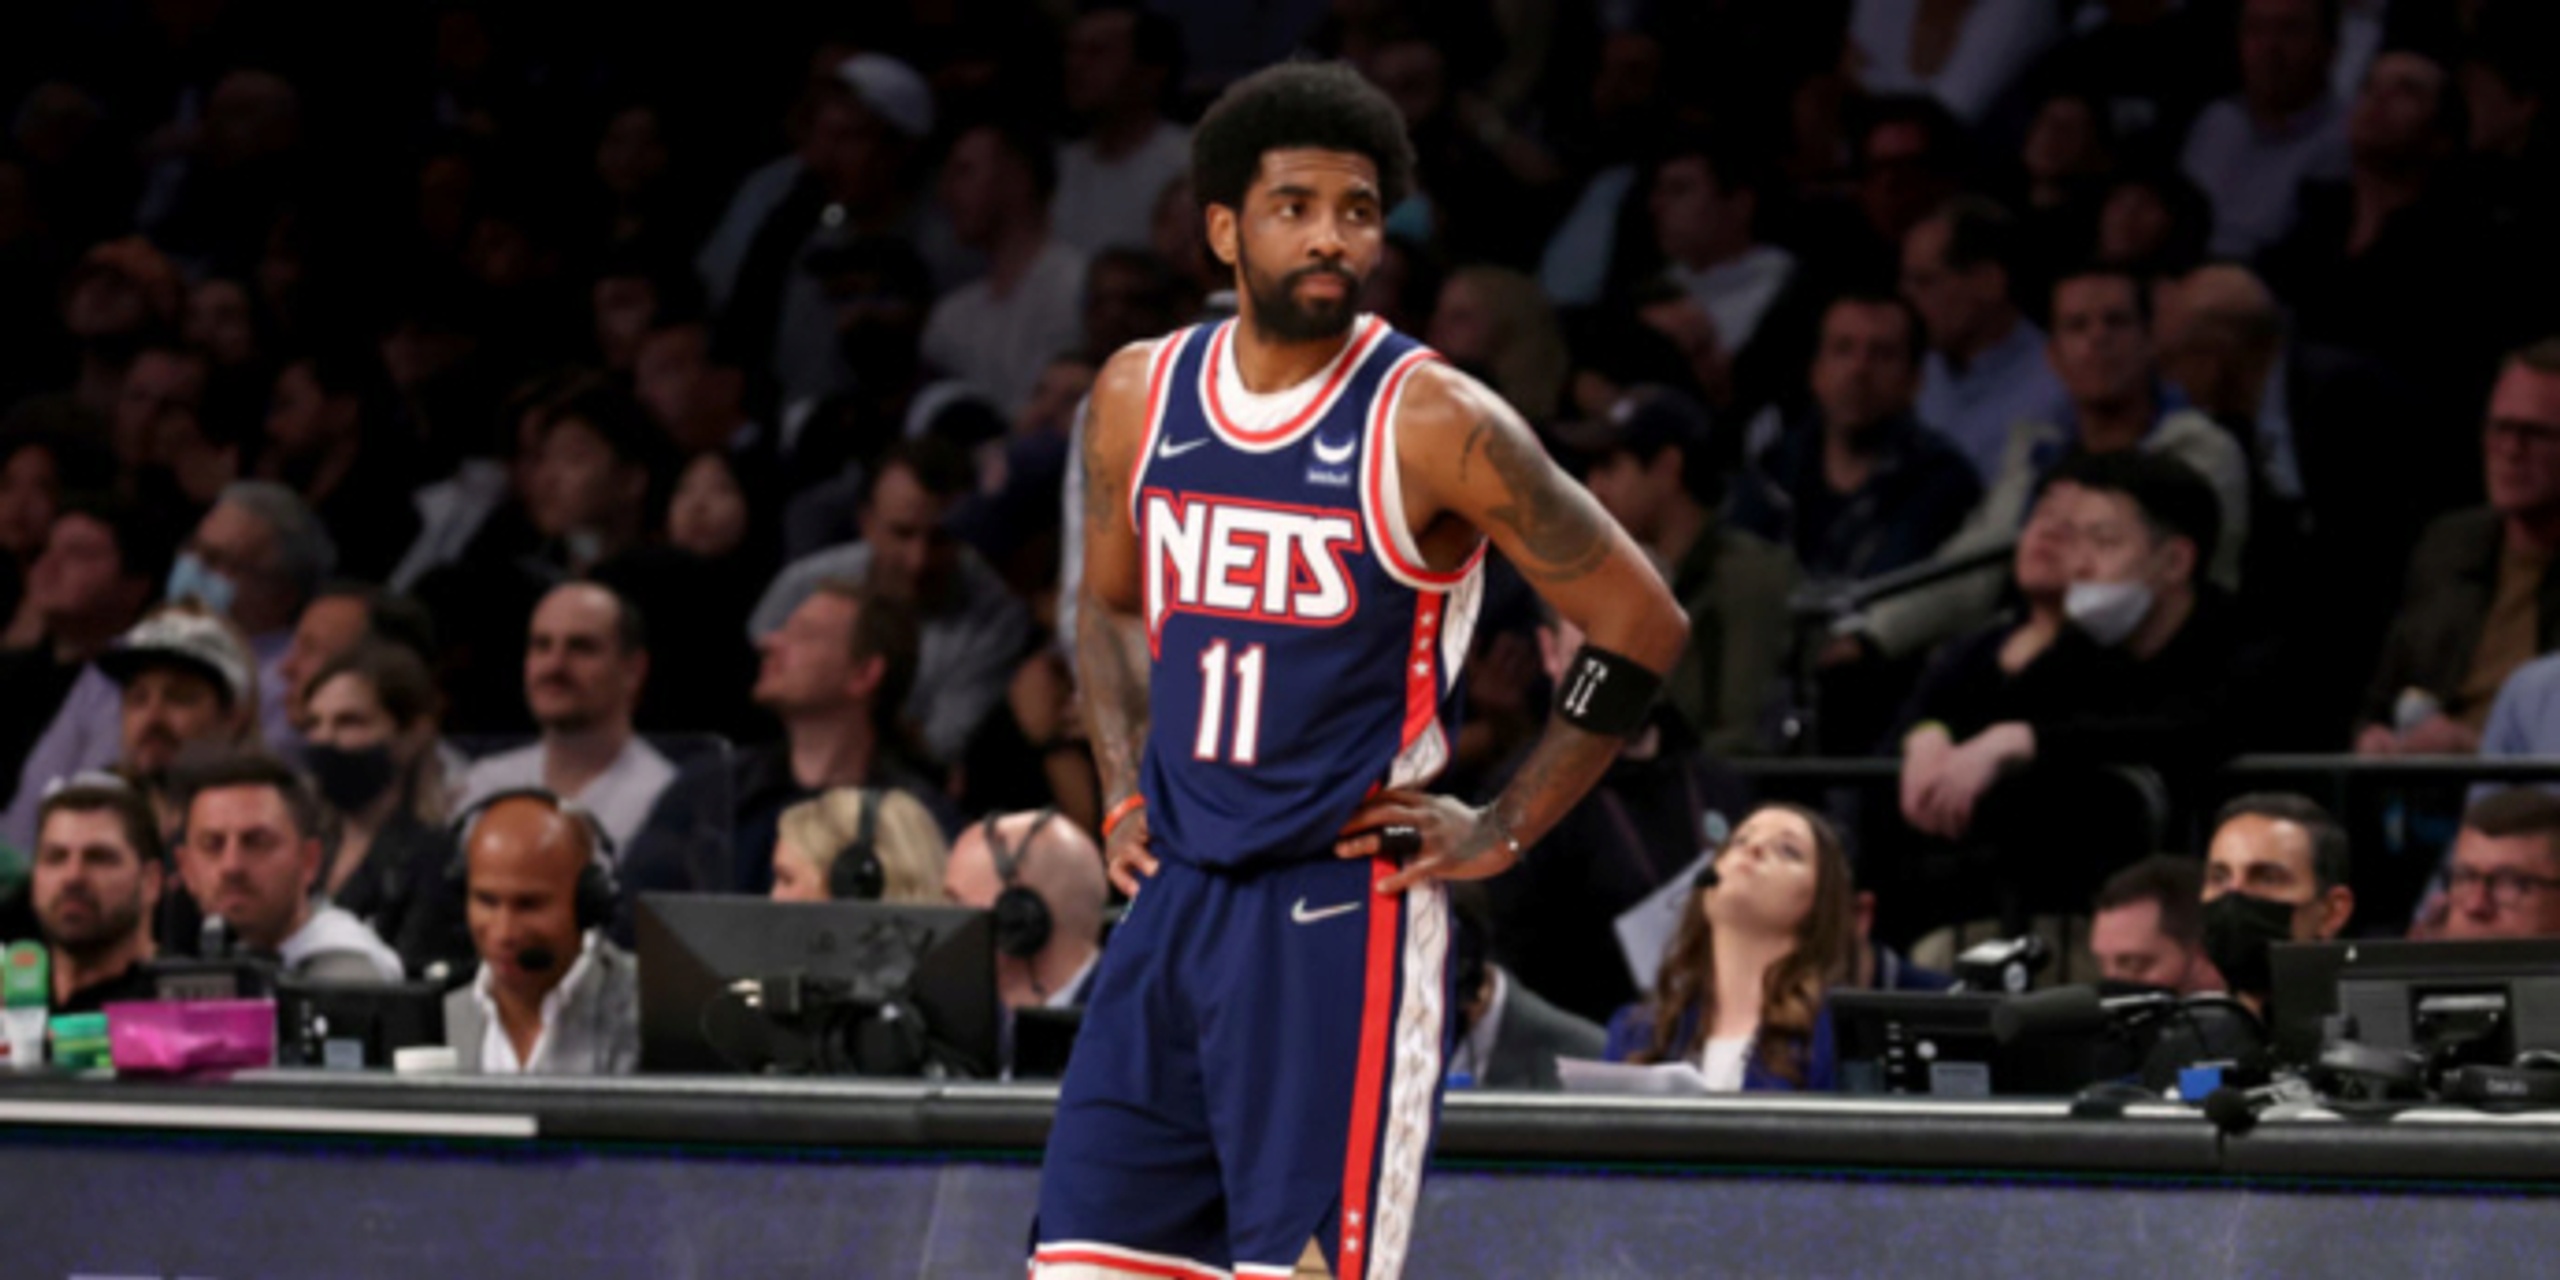 Woj: Nets noncommittal on Kyrie Irving long-term